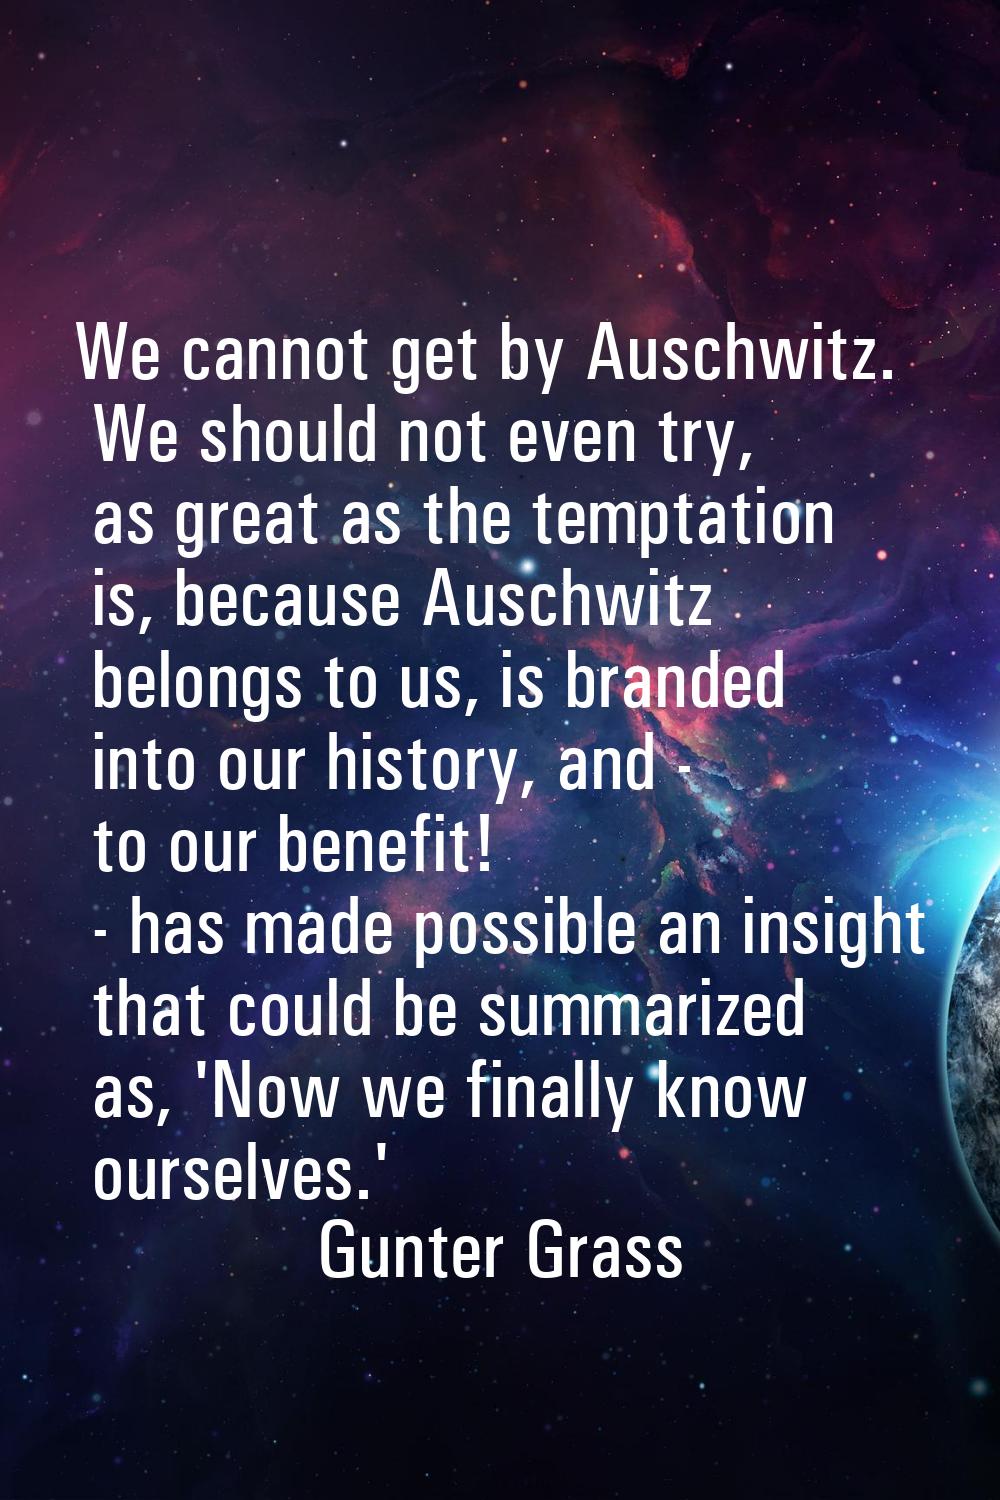 We cannot get by Auschwitz. We should not even try, as great as the temptation is, because Auschwit